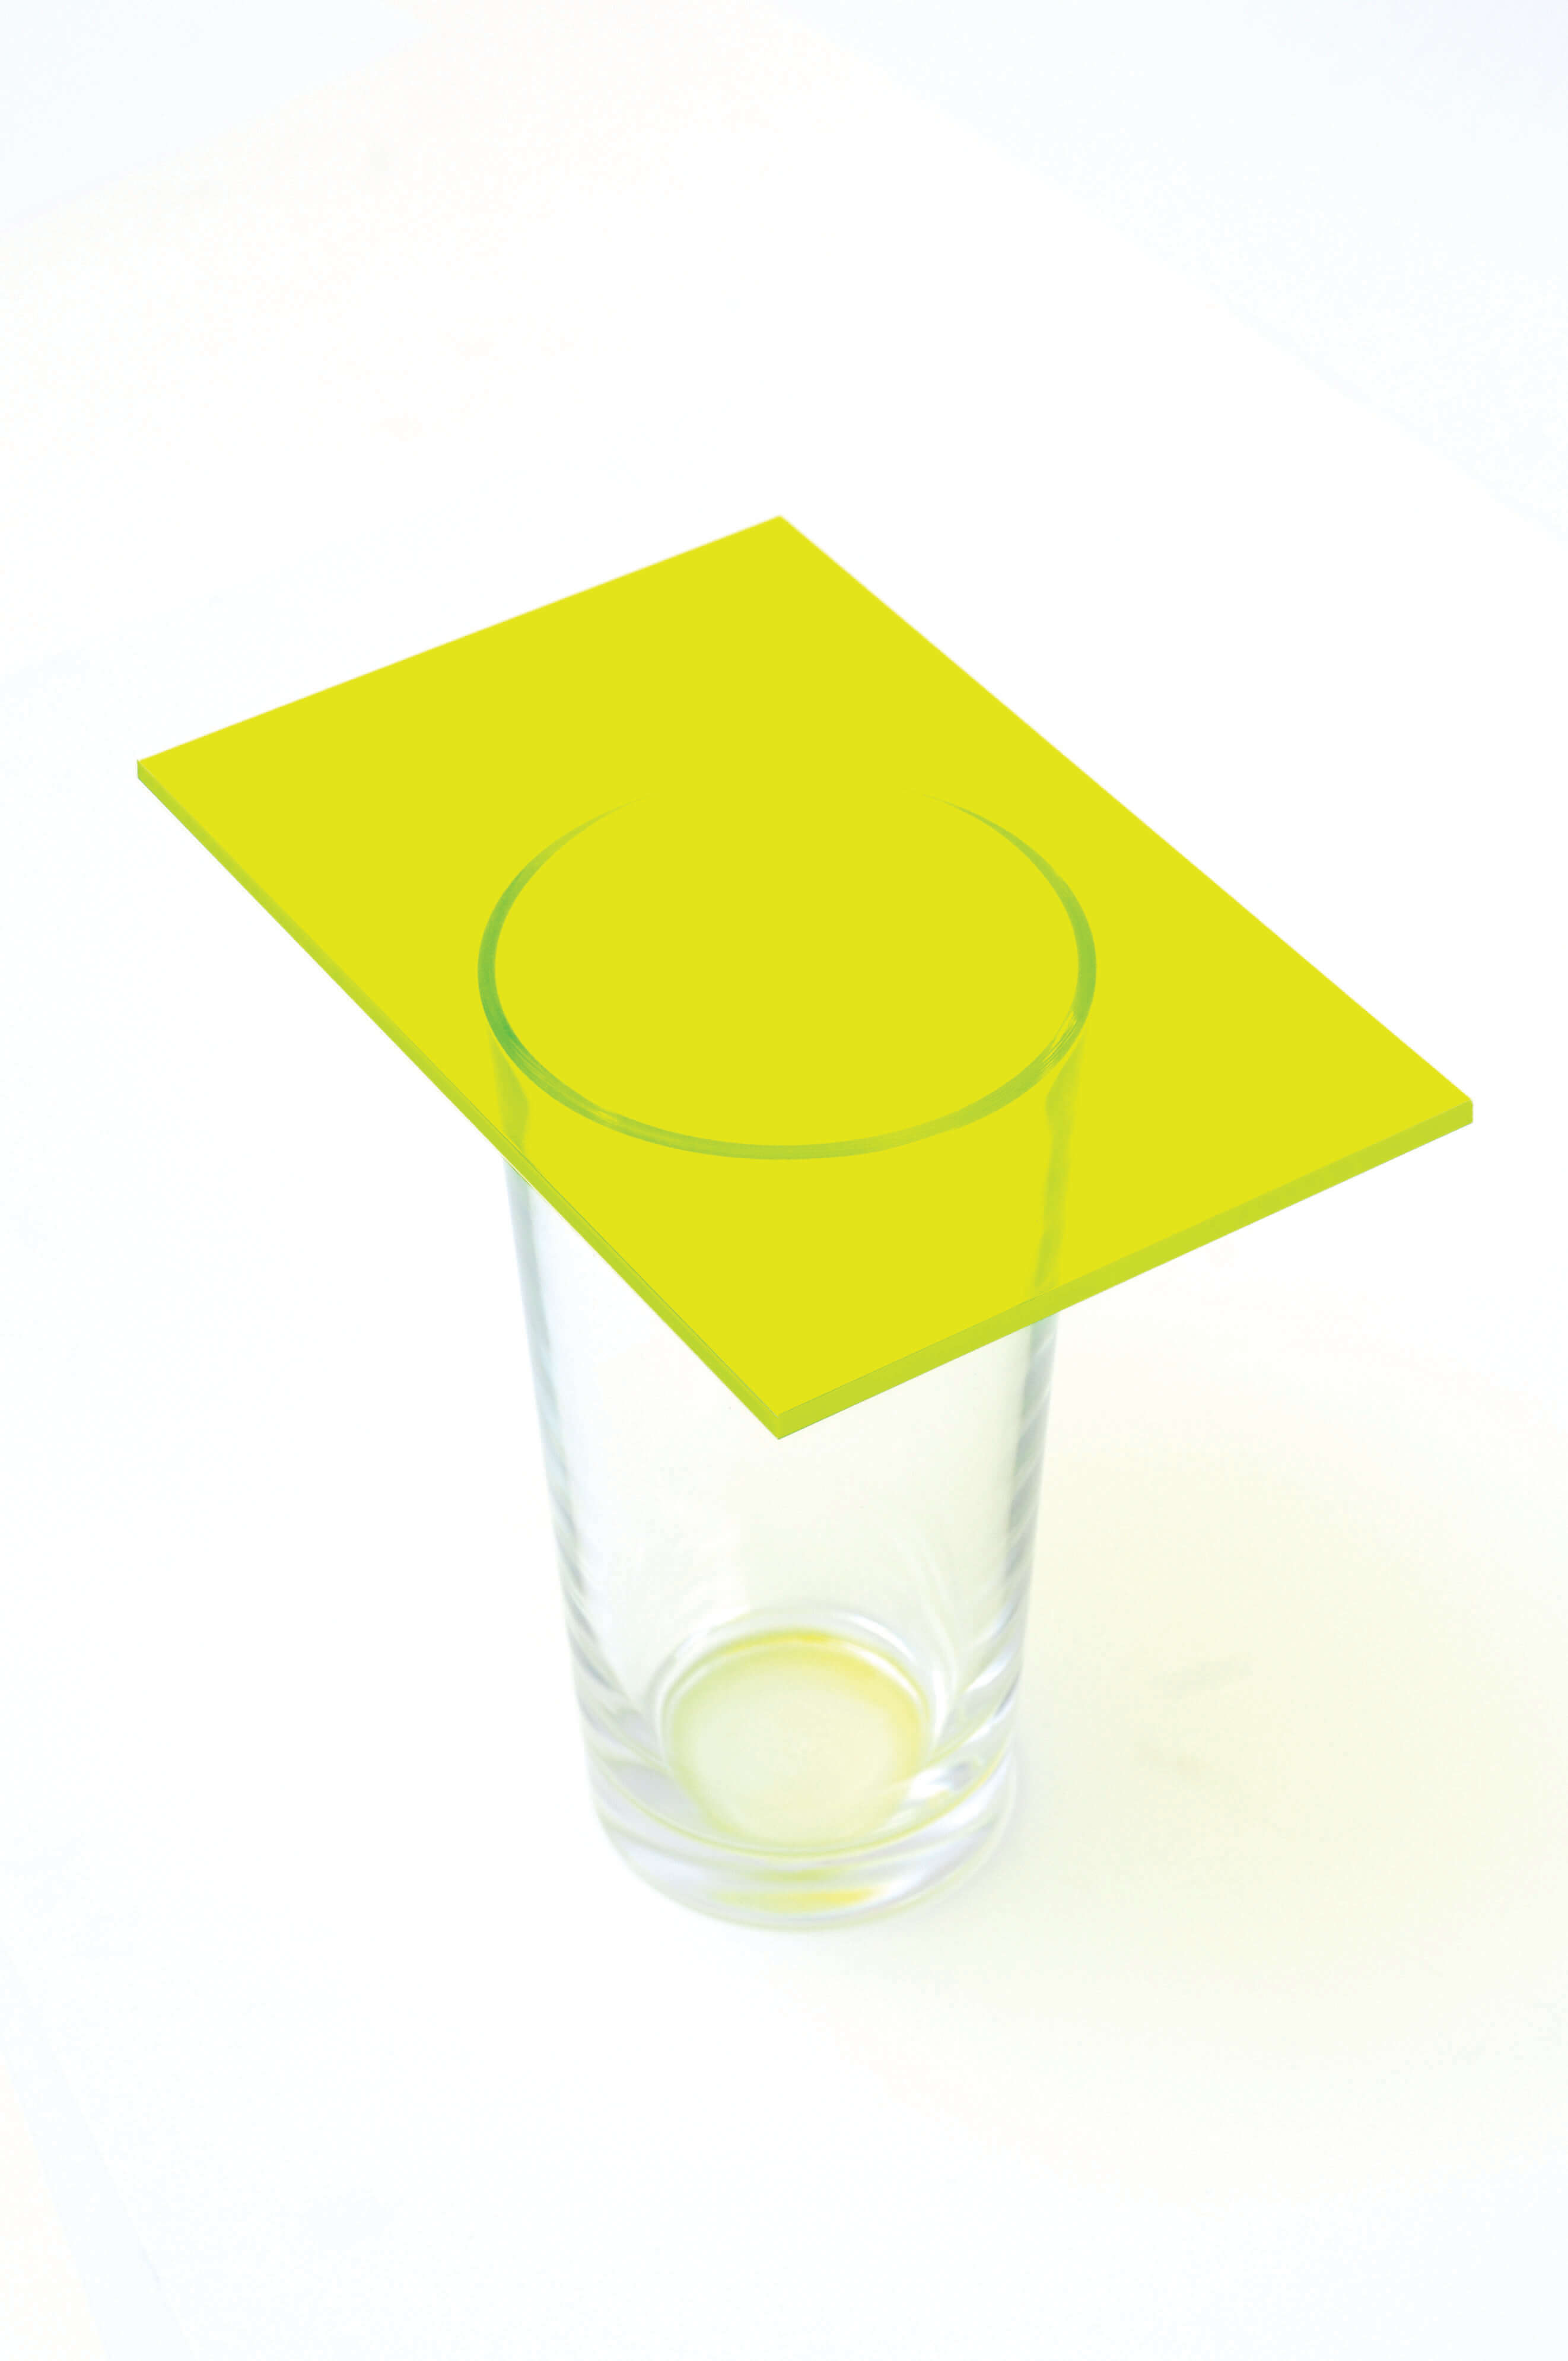 Tinted Cast Acrylic 3mm Sheet - Yellow 600 x 400mm